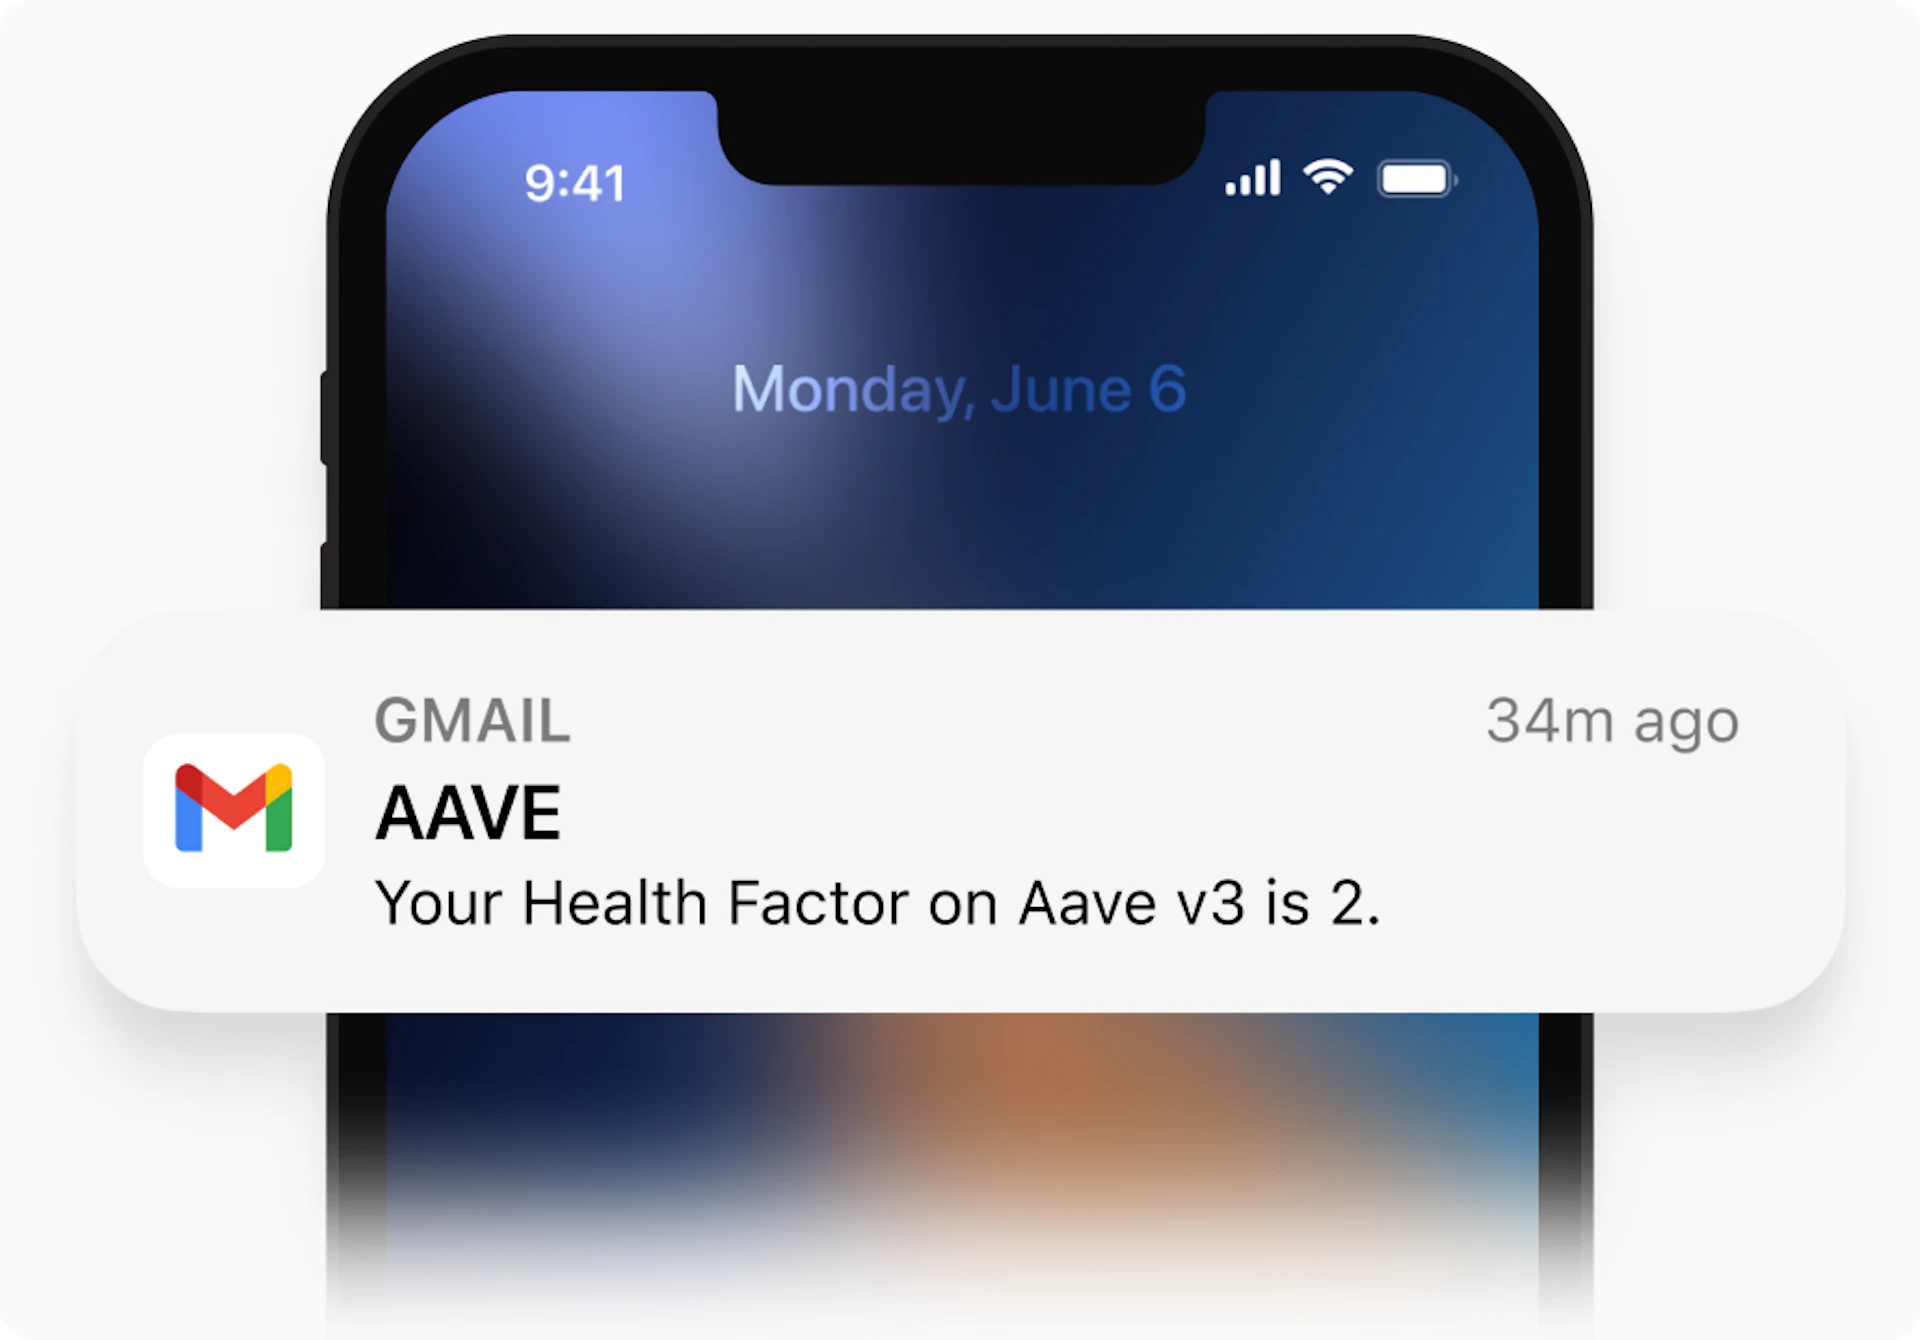 AAVE integration